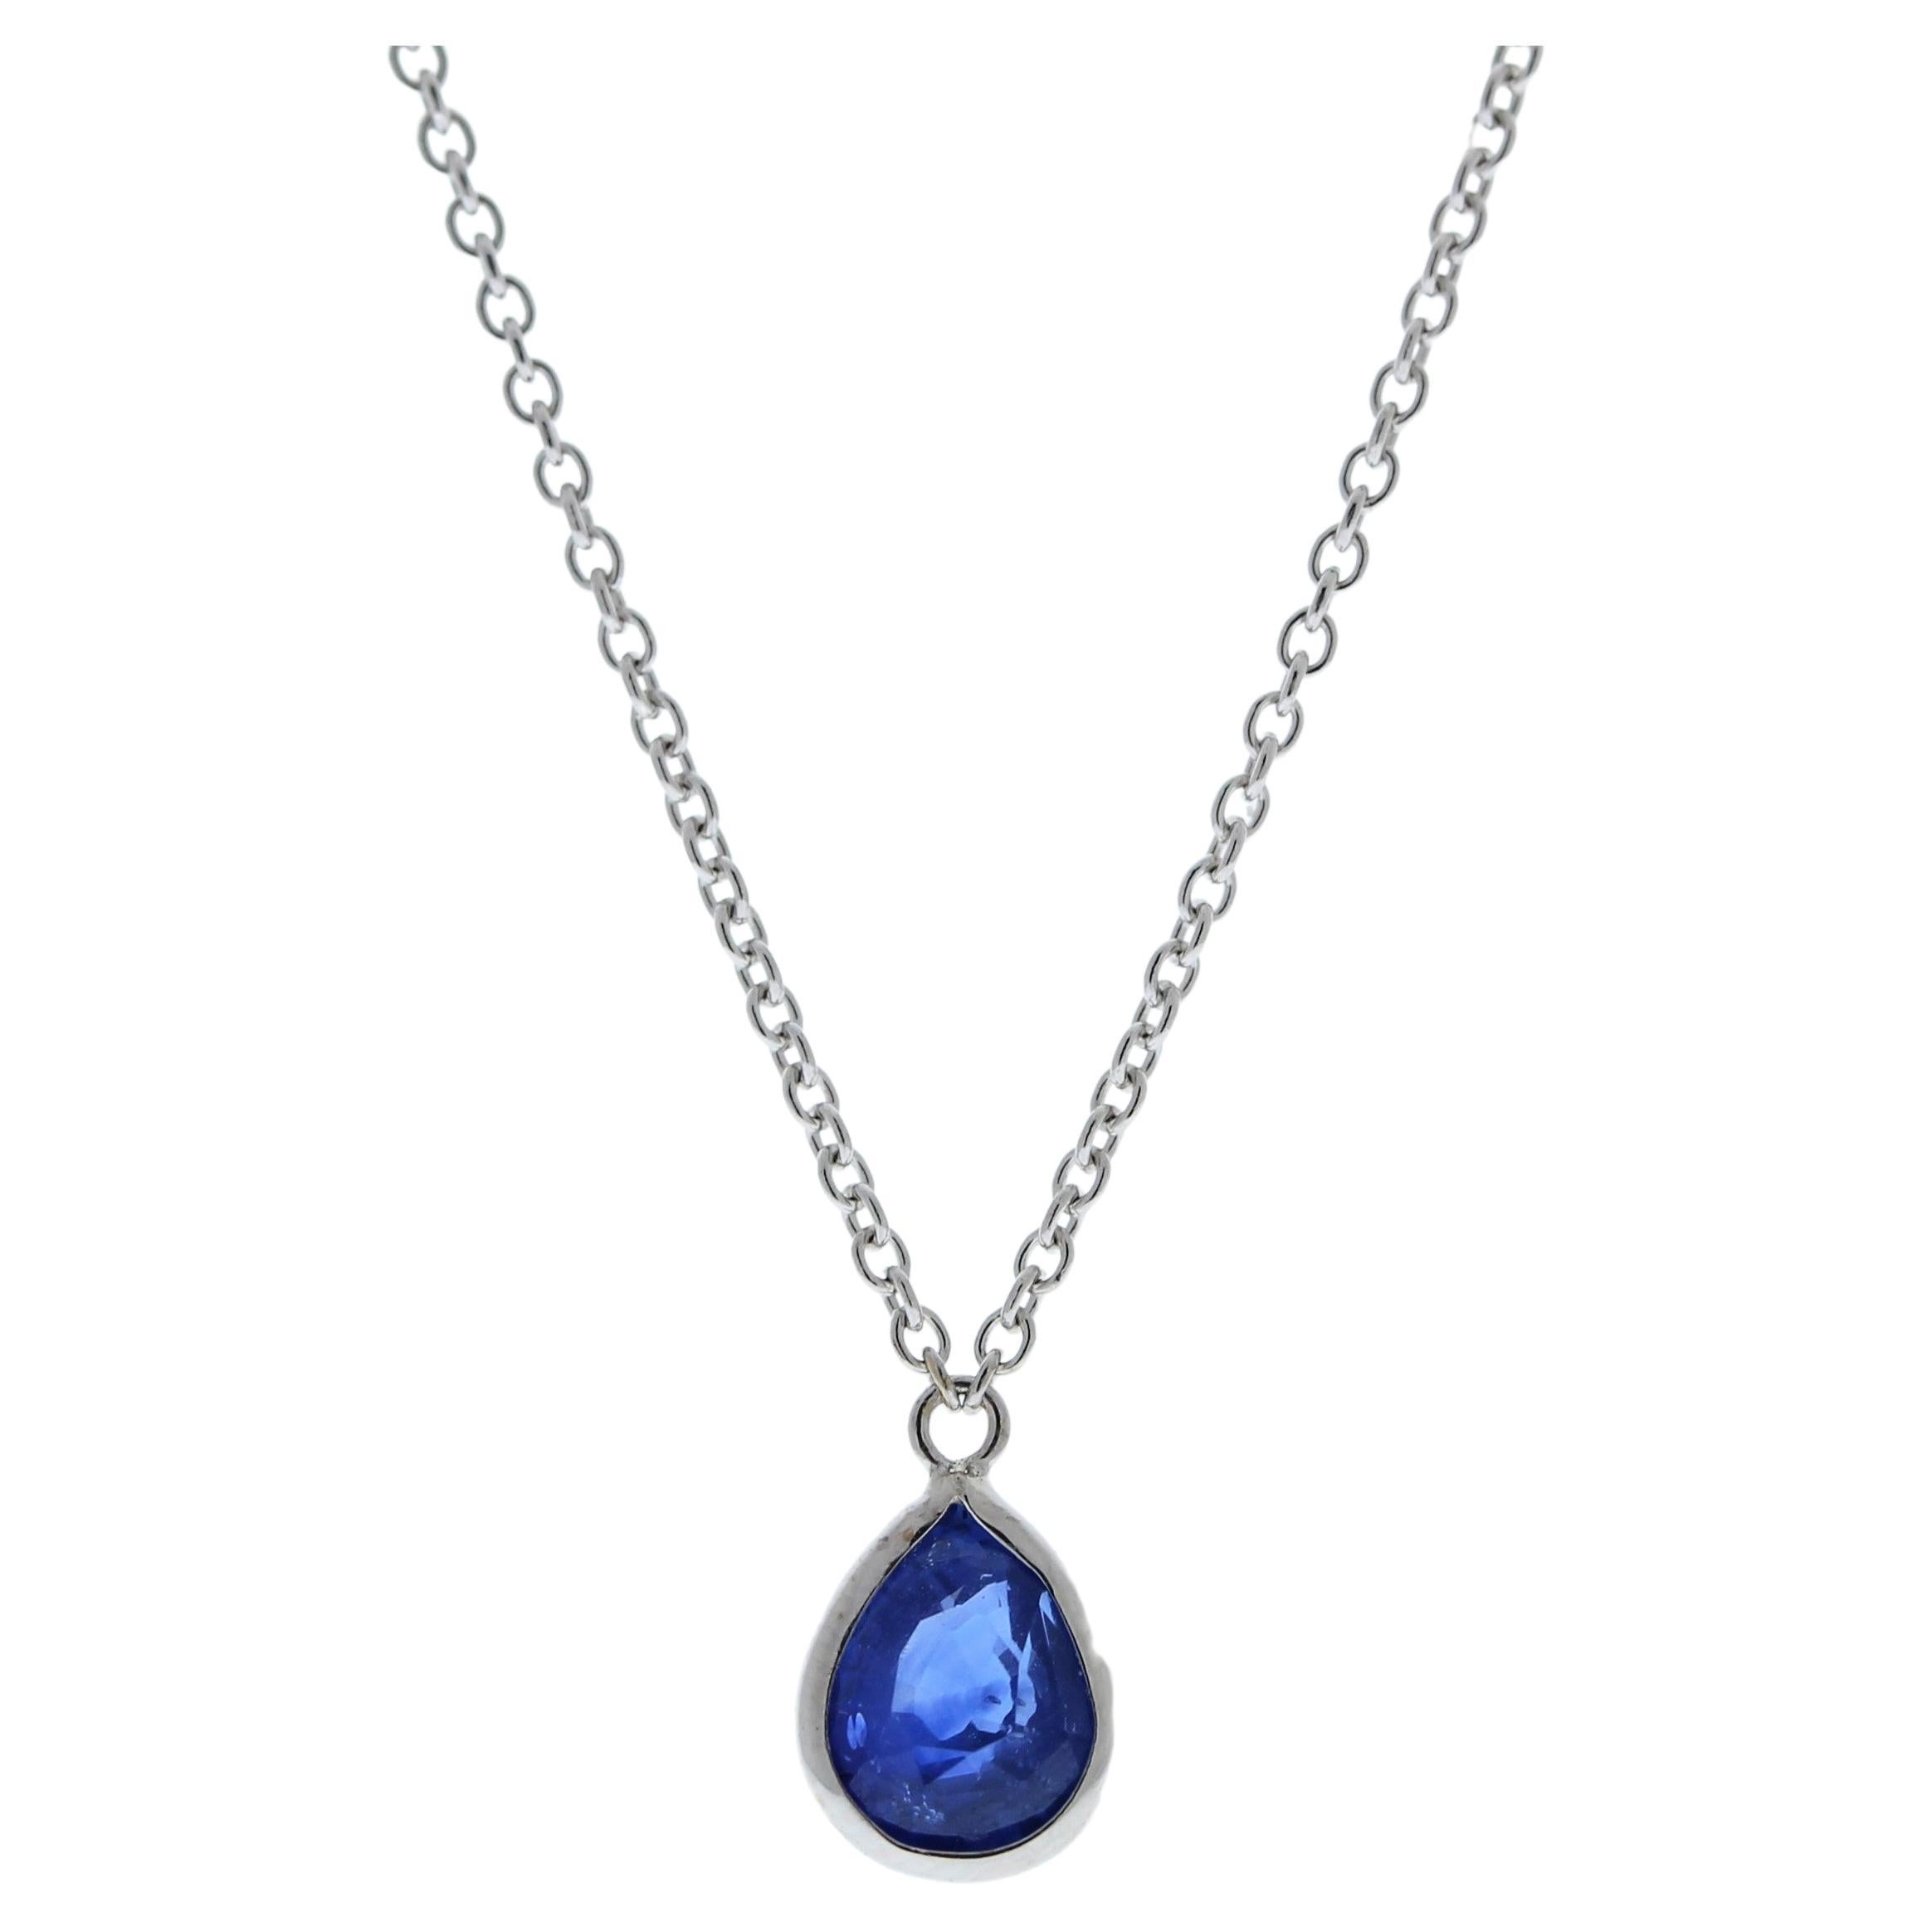 1.49 Carat Pear Sapphire Blue Fashion Necklaces In 14k White Gold For Sale